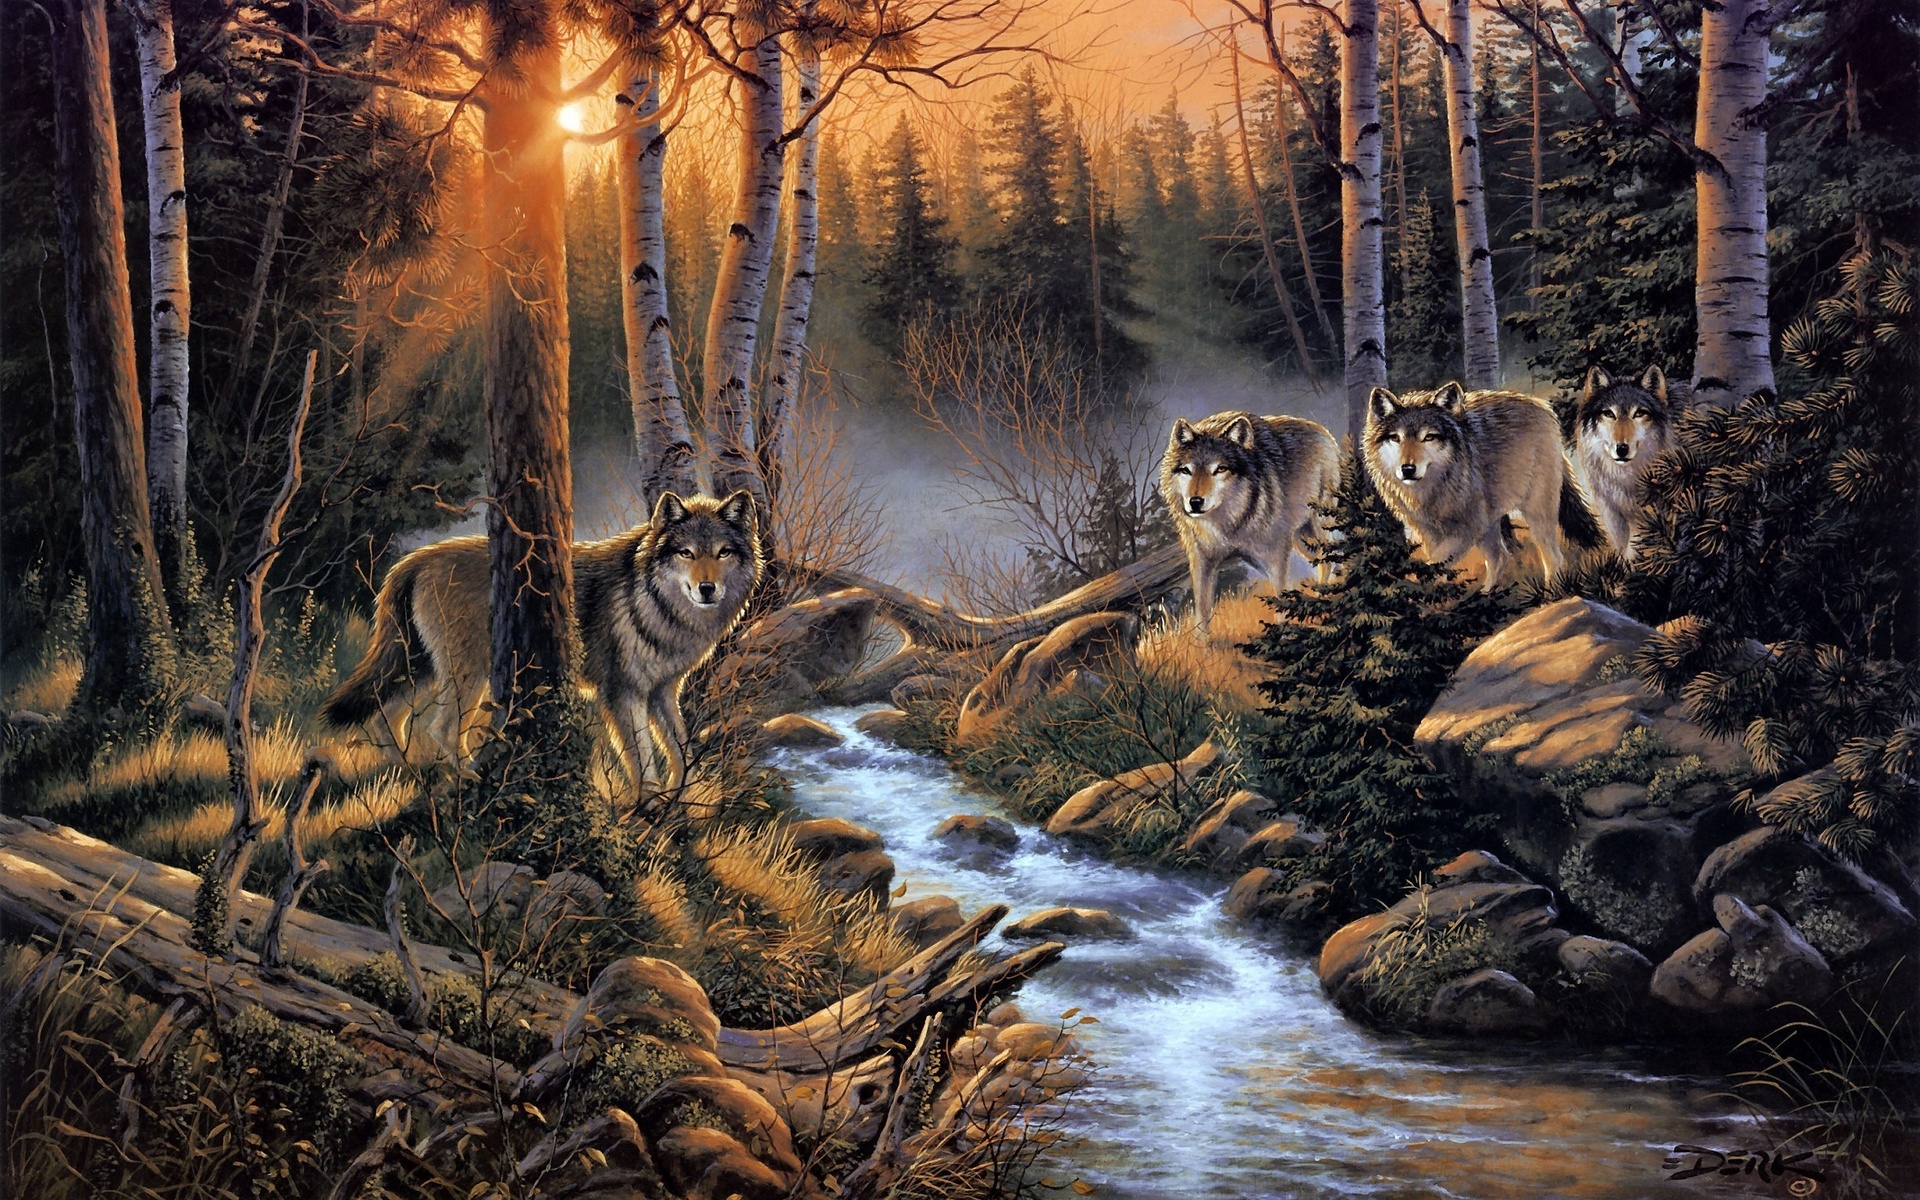 wolves, Wolf, Paintings, Artistic, Art, Print, Landscapes, Nature, Rivers, Streams, Woods, Trees, Forests, Sunset, Sunrise, Predators, Wood, Rocks Wallpaper